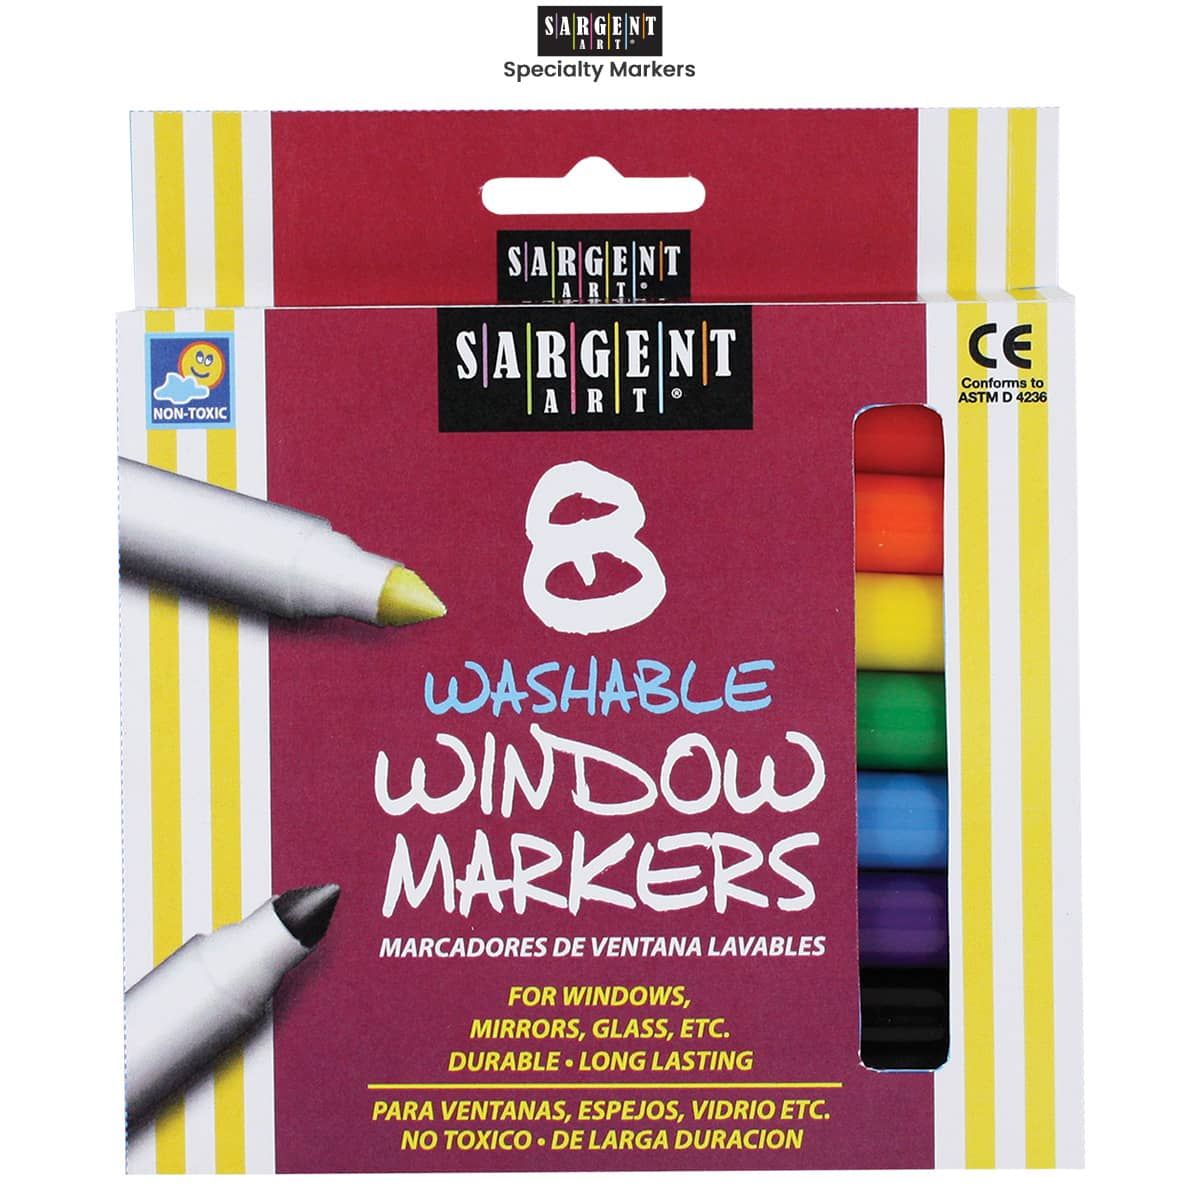 Sargent Art Specialty Markers